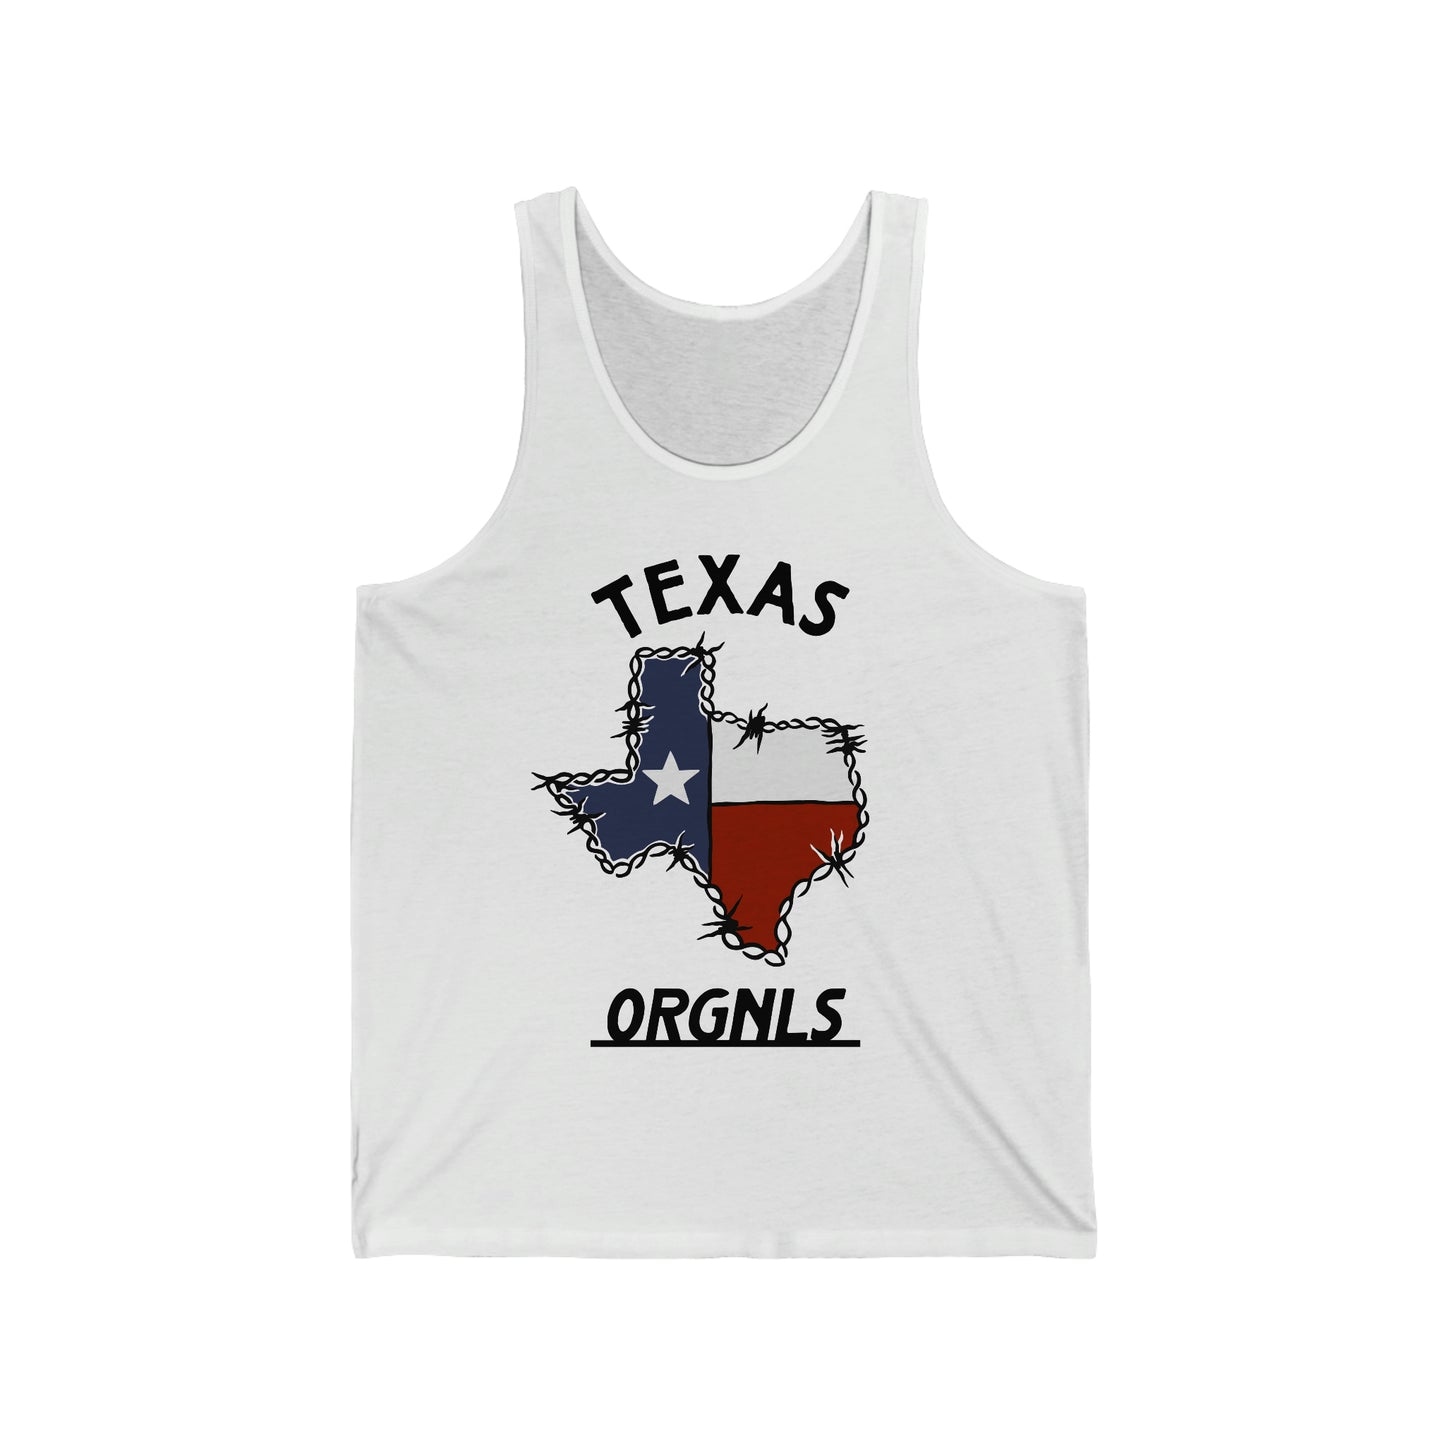 Texas Orgnls “Barbed Wire” Unisex Tank